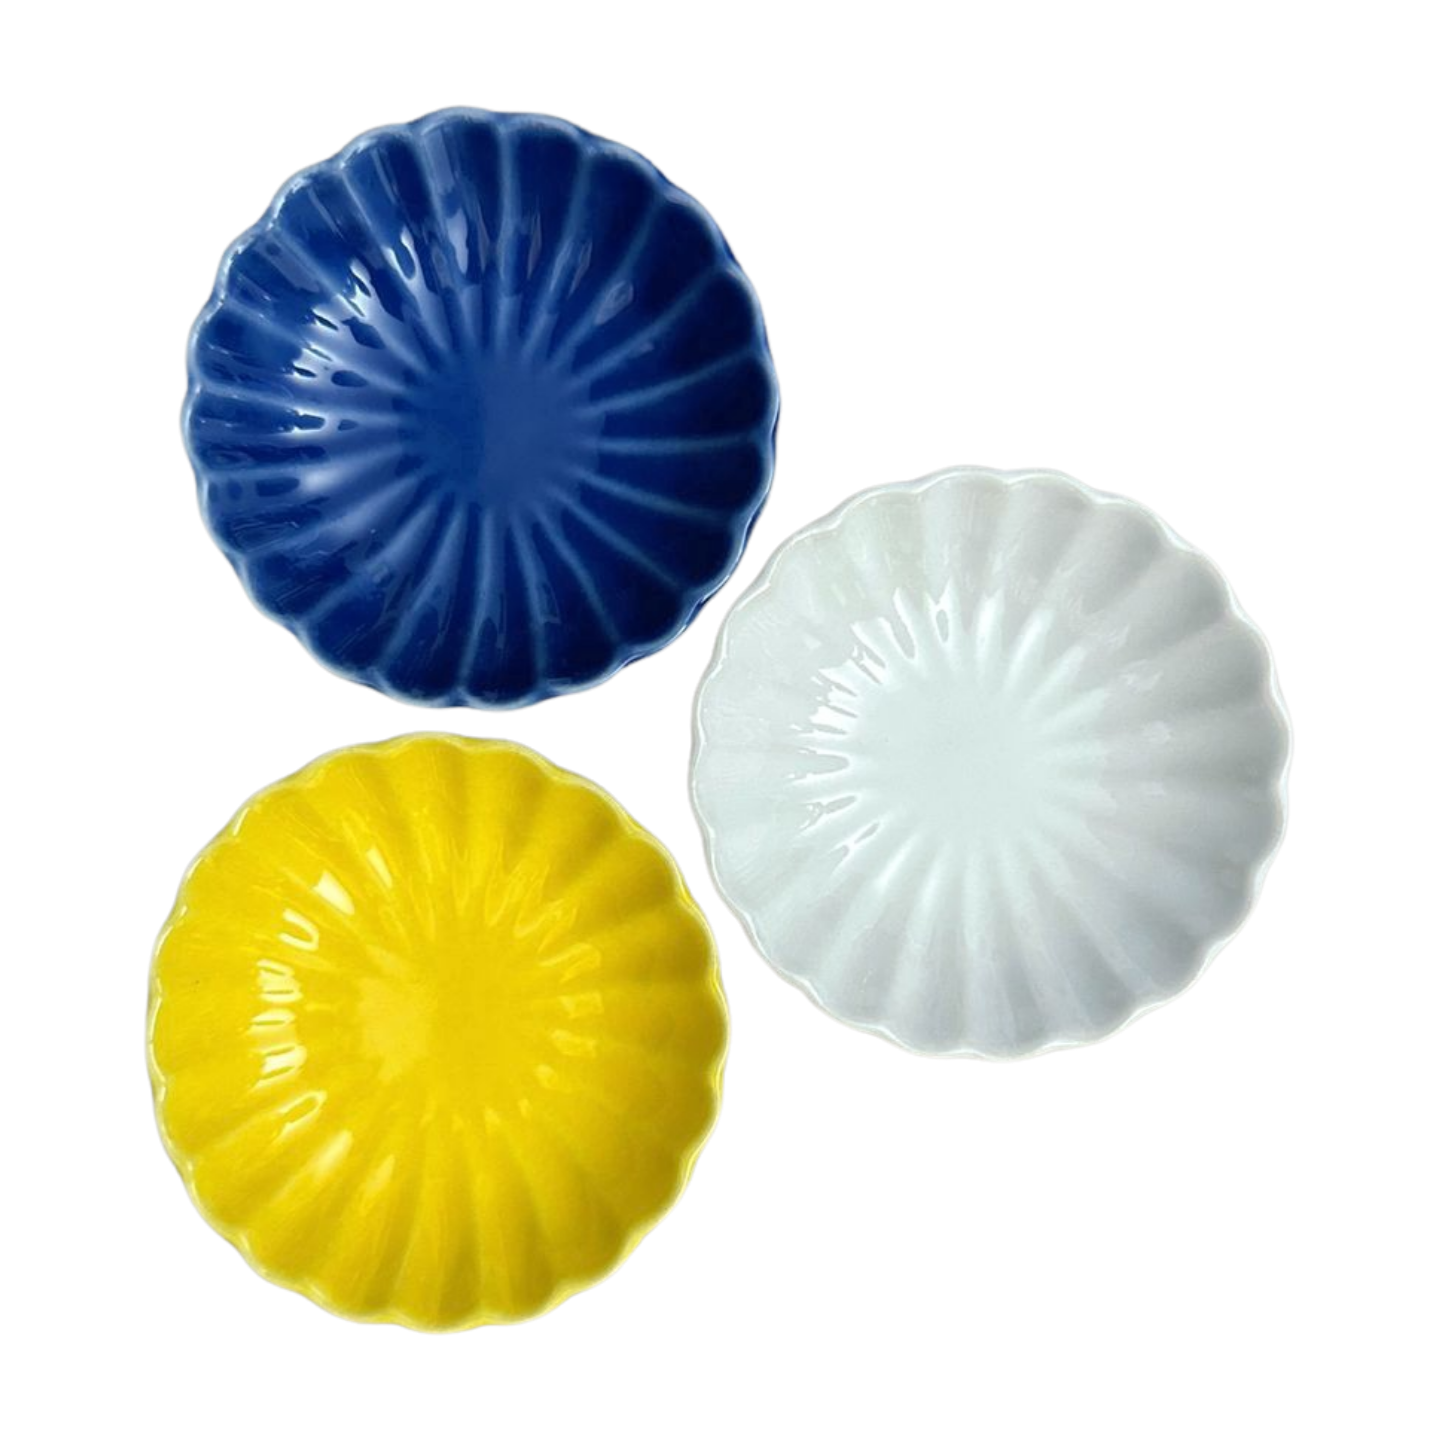 Set of three Japanese Sauce Plates in blue, yellow, and white.